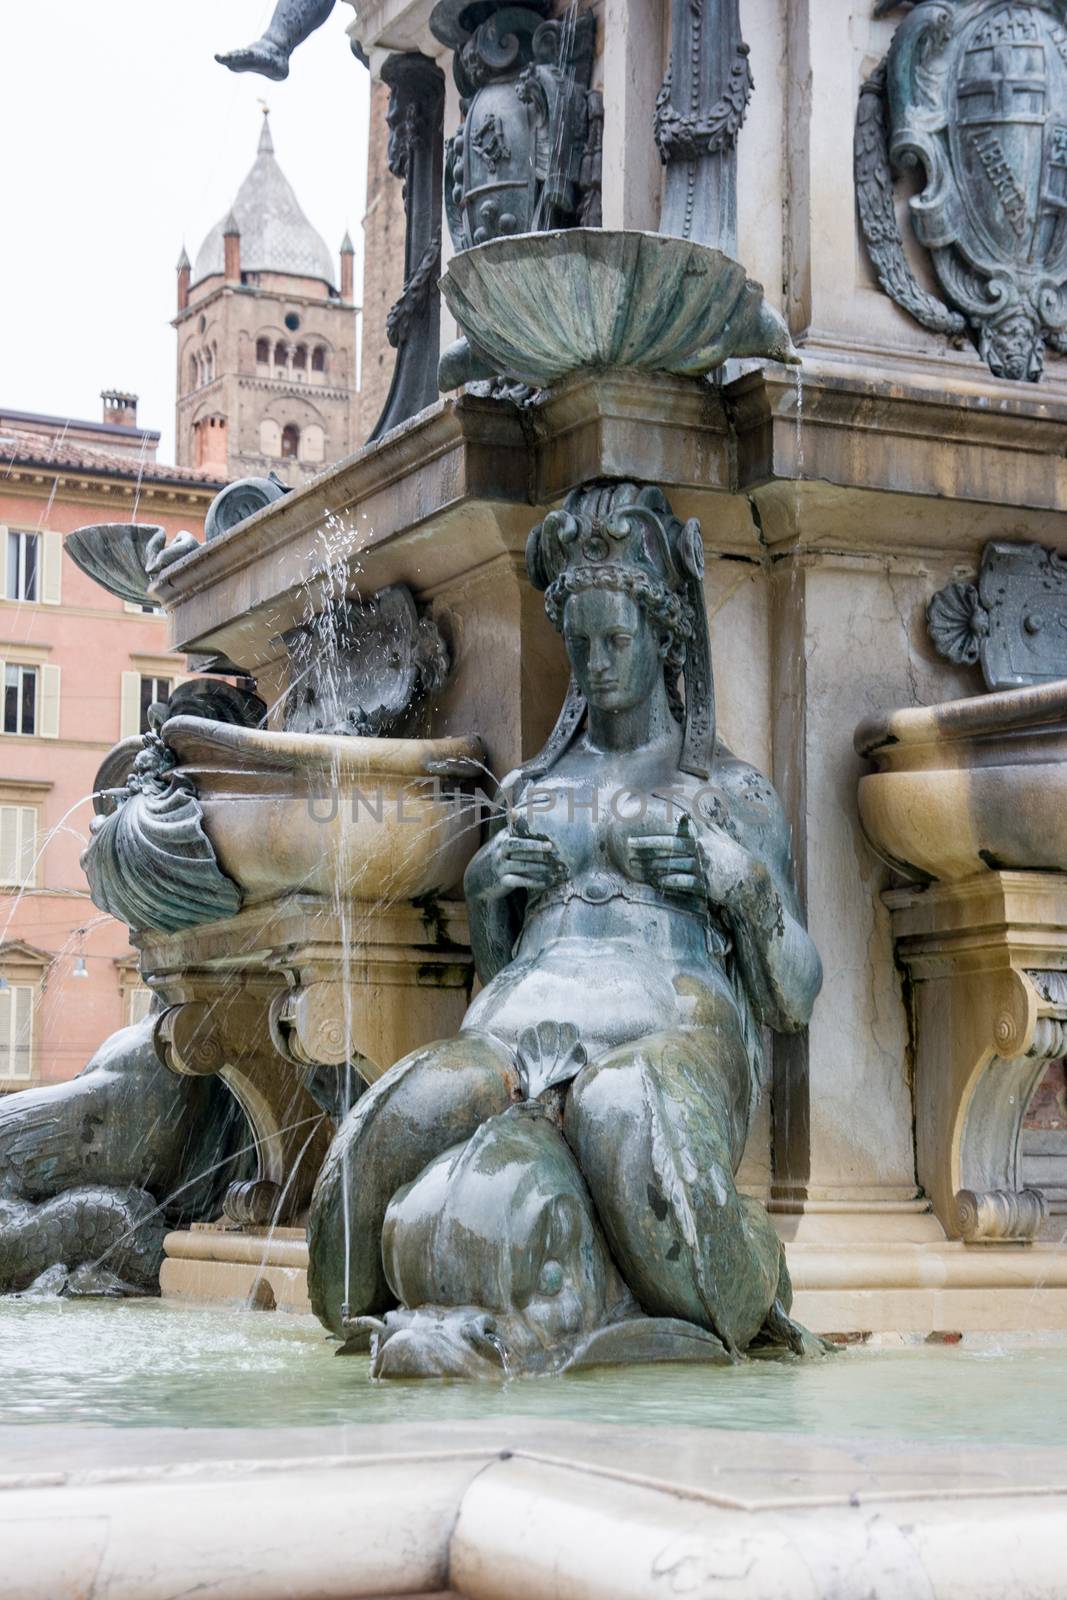 The beatiful ancient Fountain of Neptune in Bologna Italy